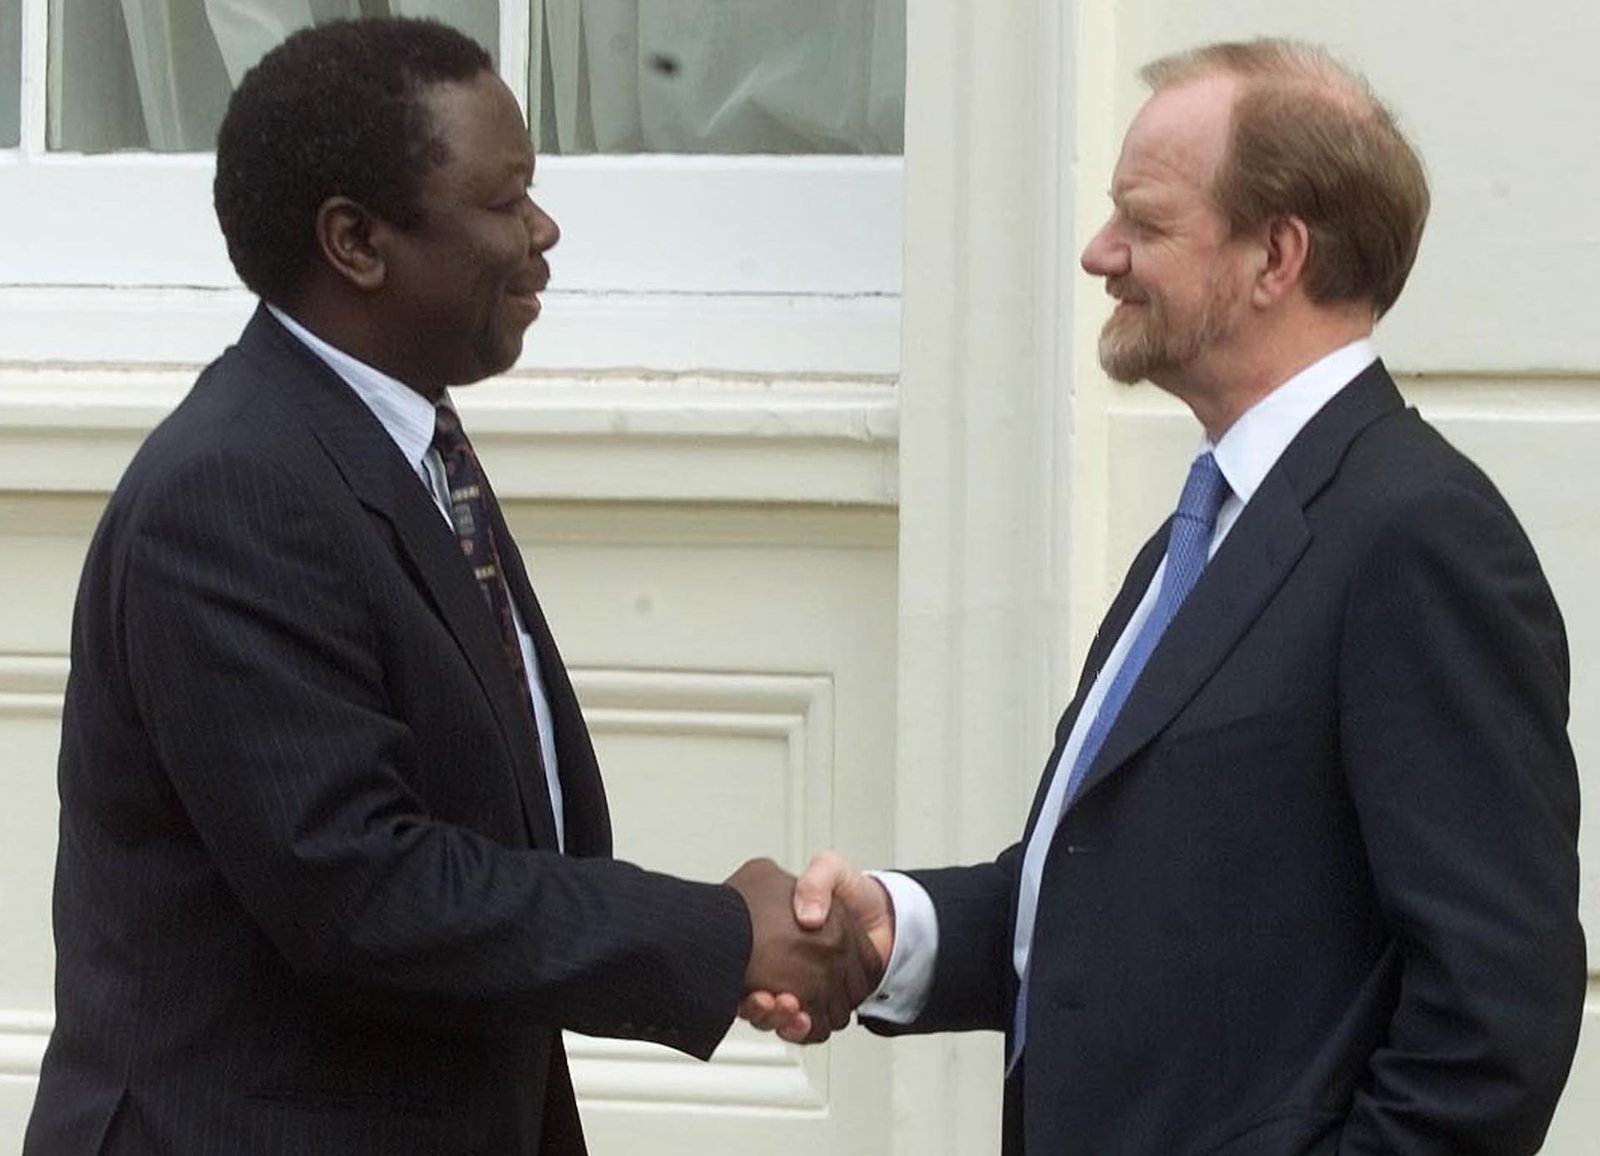 Meeting Robin Cook the then UK foreign secretary to discuss tensions in Zimbabwe caused by the seizure of white owned farms in April 2000 | Report Focus News